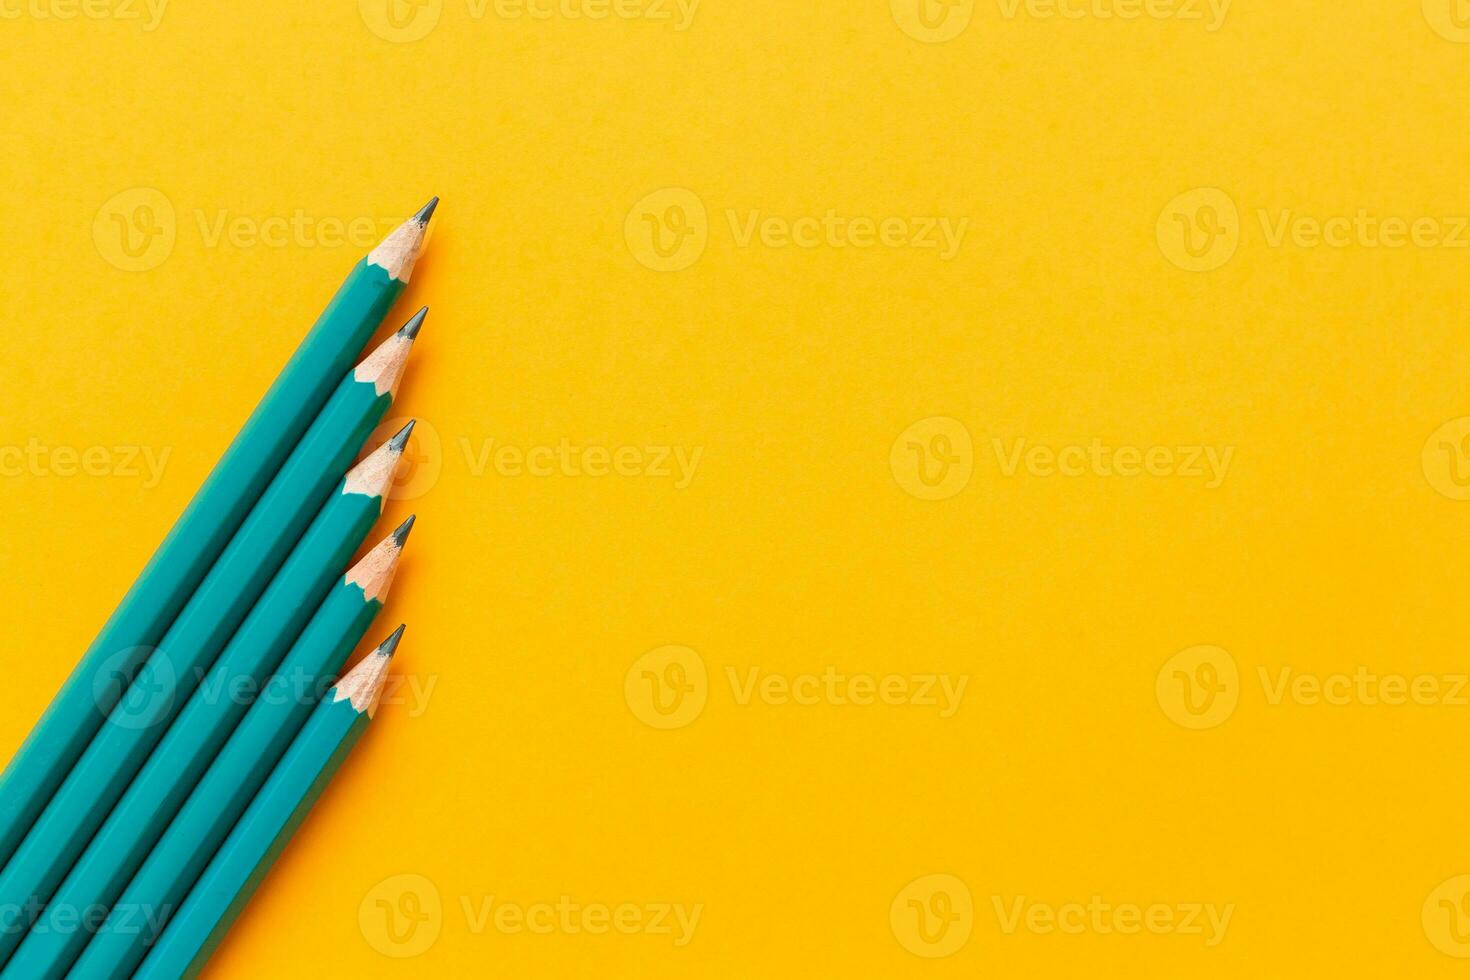 Template with copy space by top view close up macro photo of wooden pencils isolated on yellow paper that look minimalist and clean.